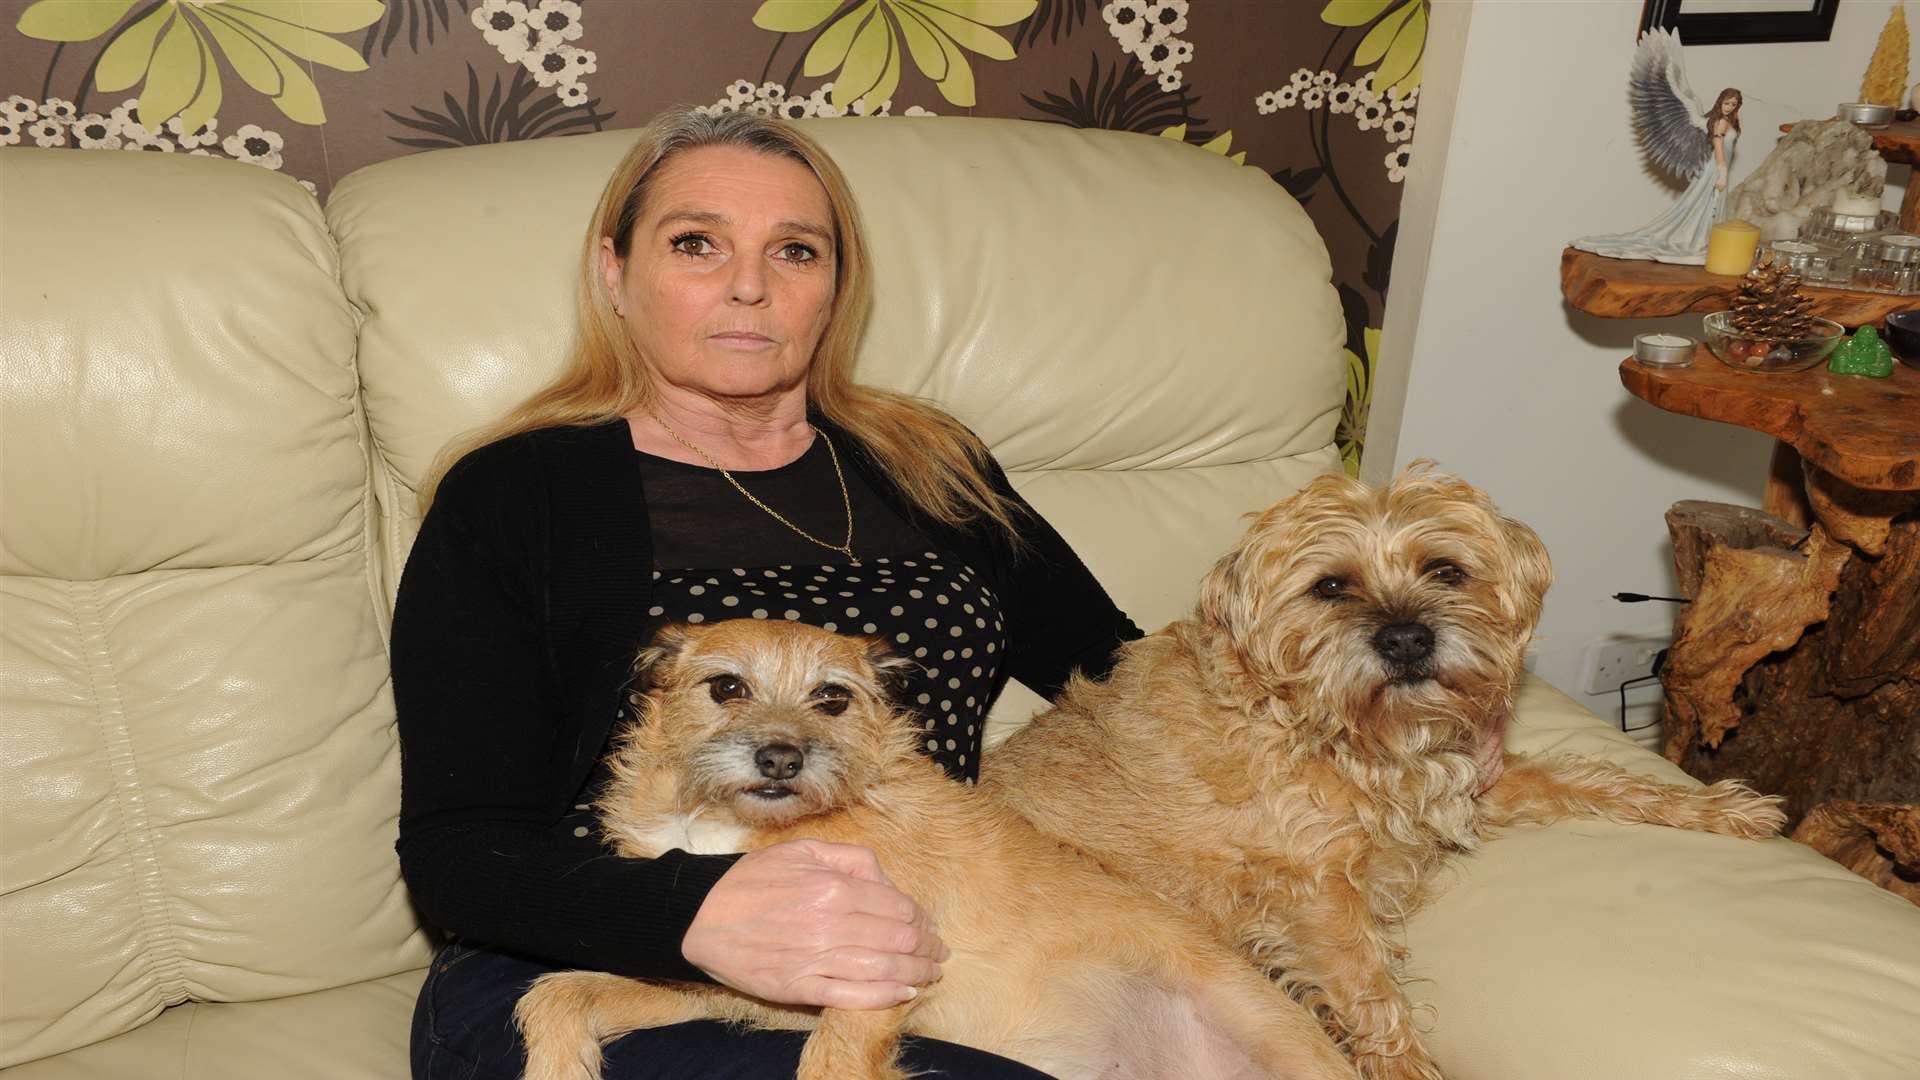 Carole at home with her dogs Oscar and Bonnie